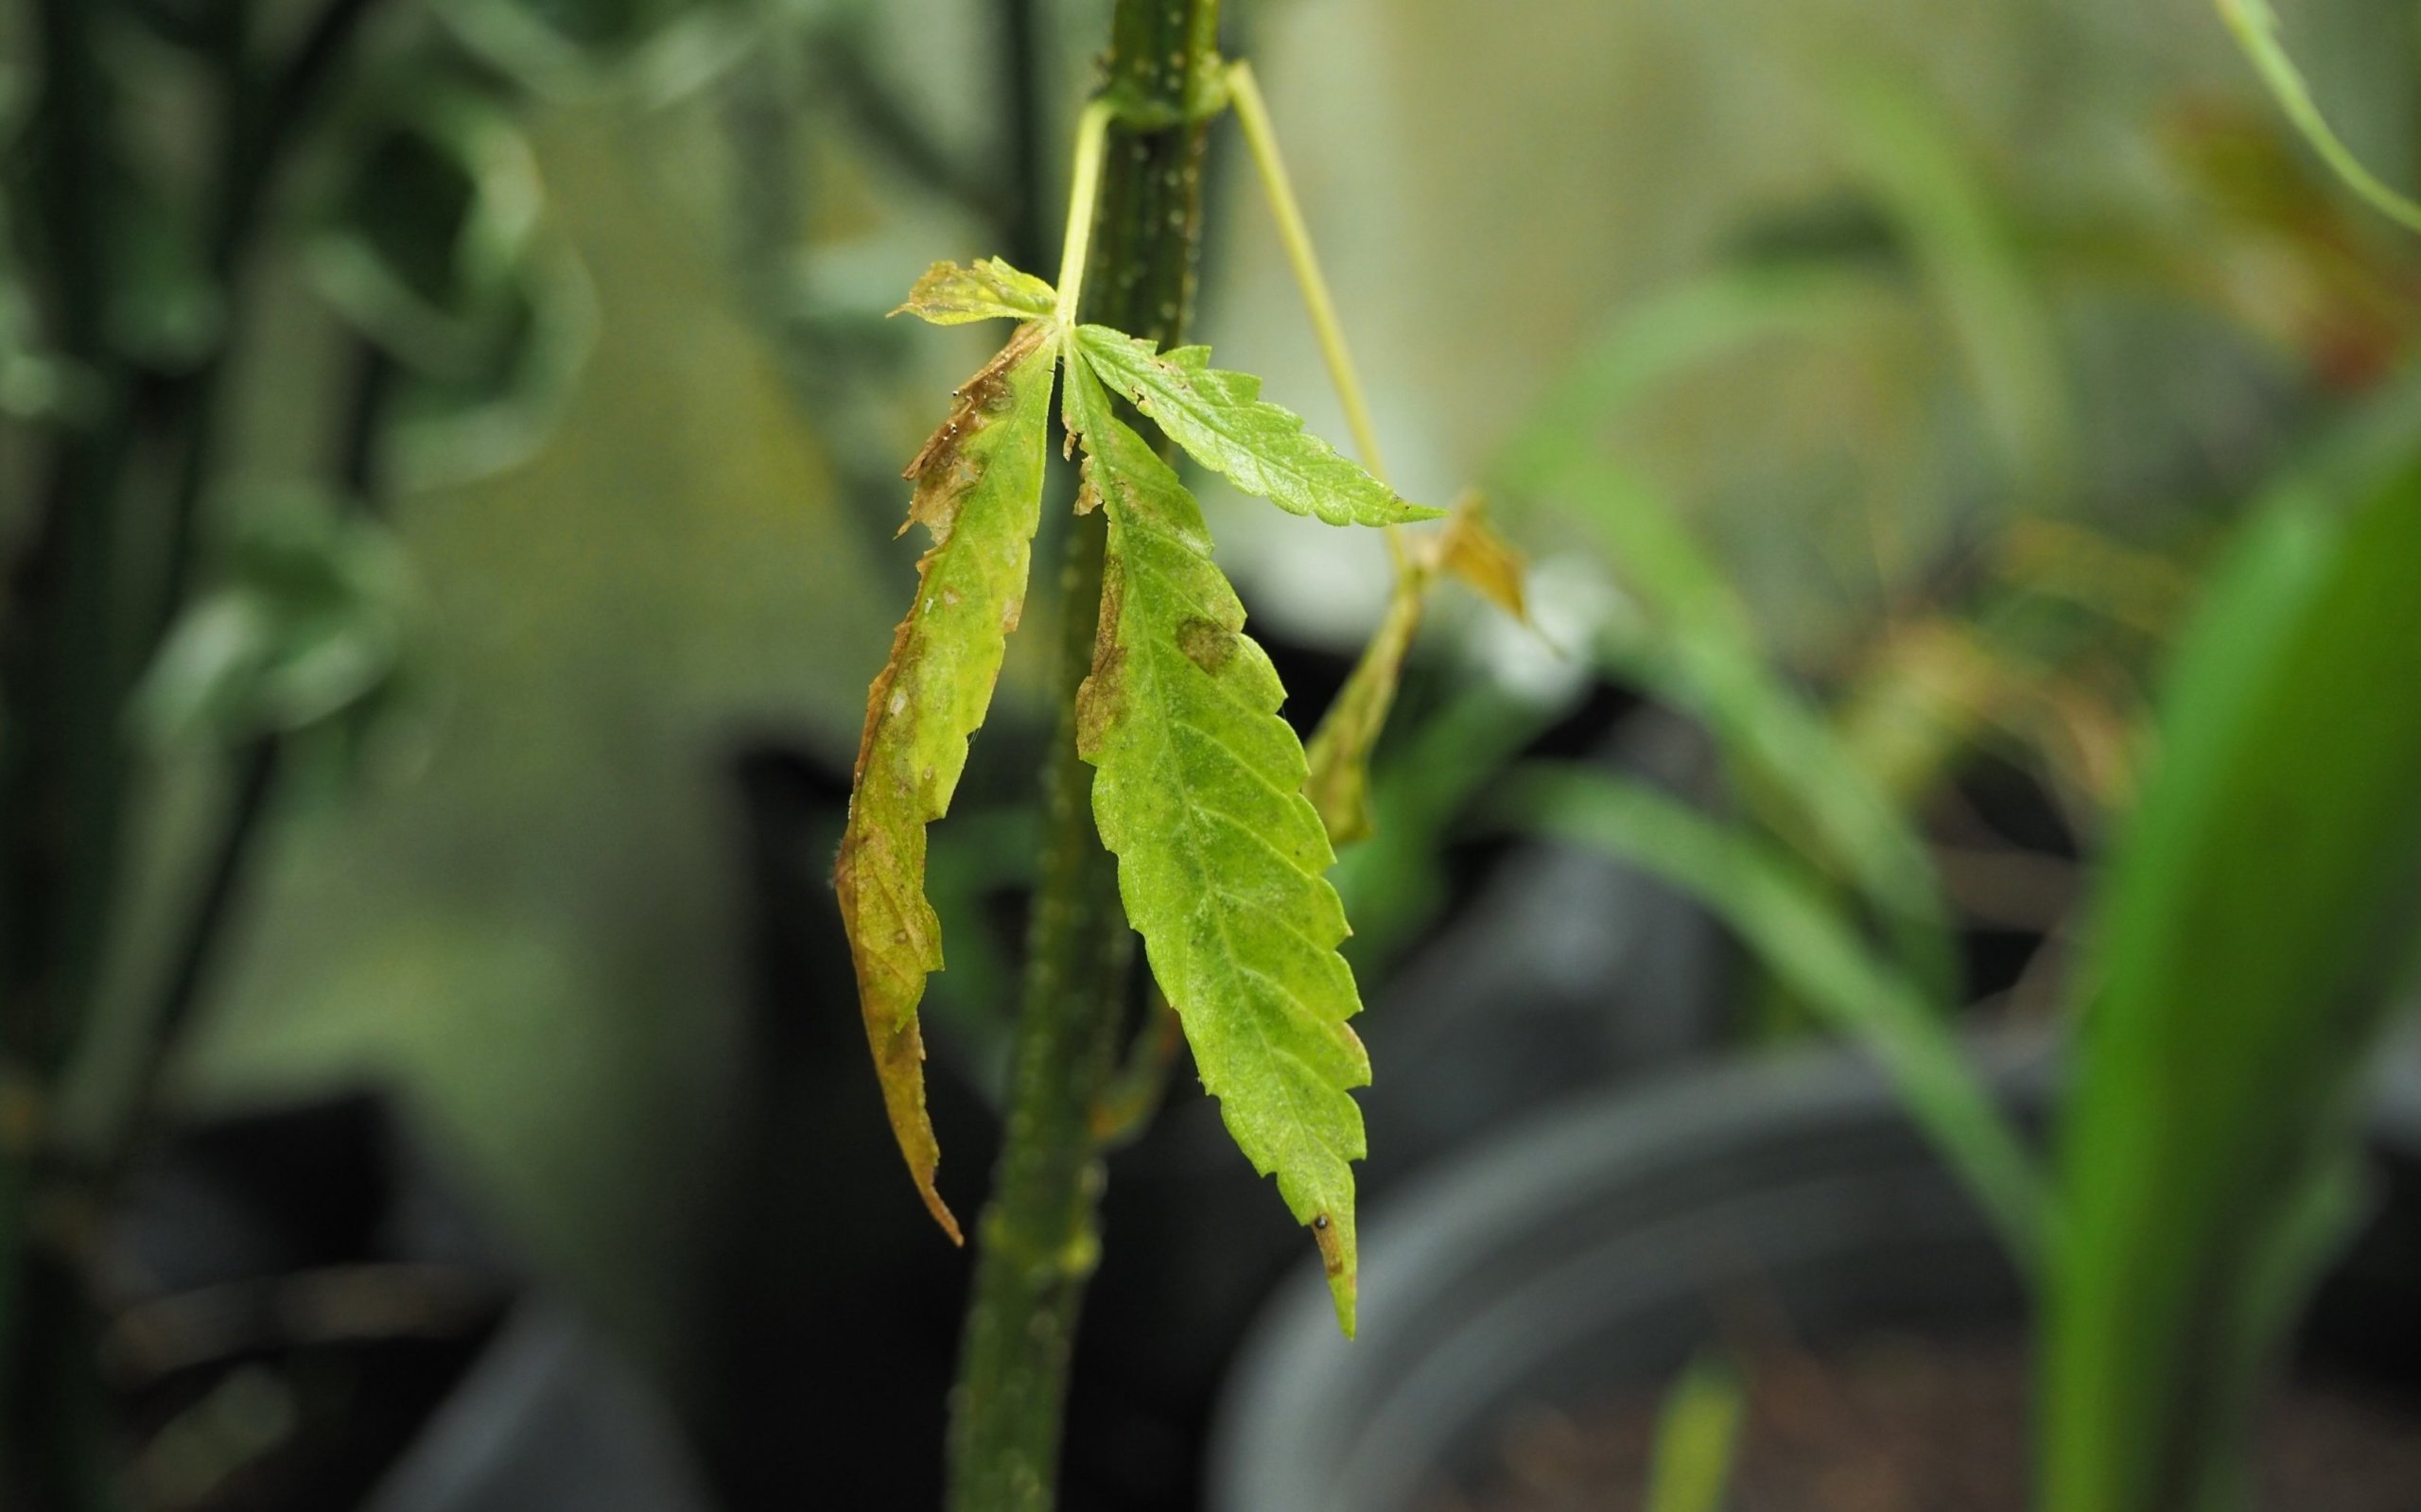 Signs of russet mites on cannabis